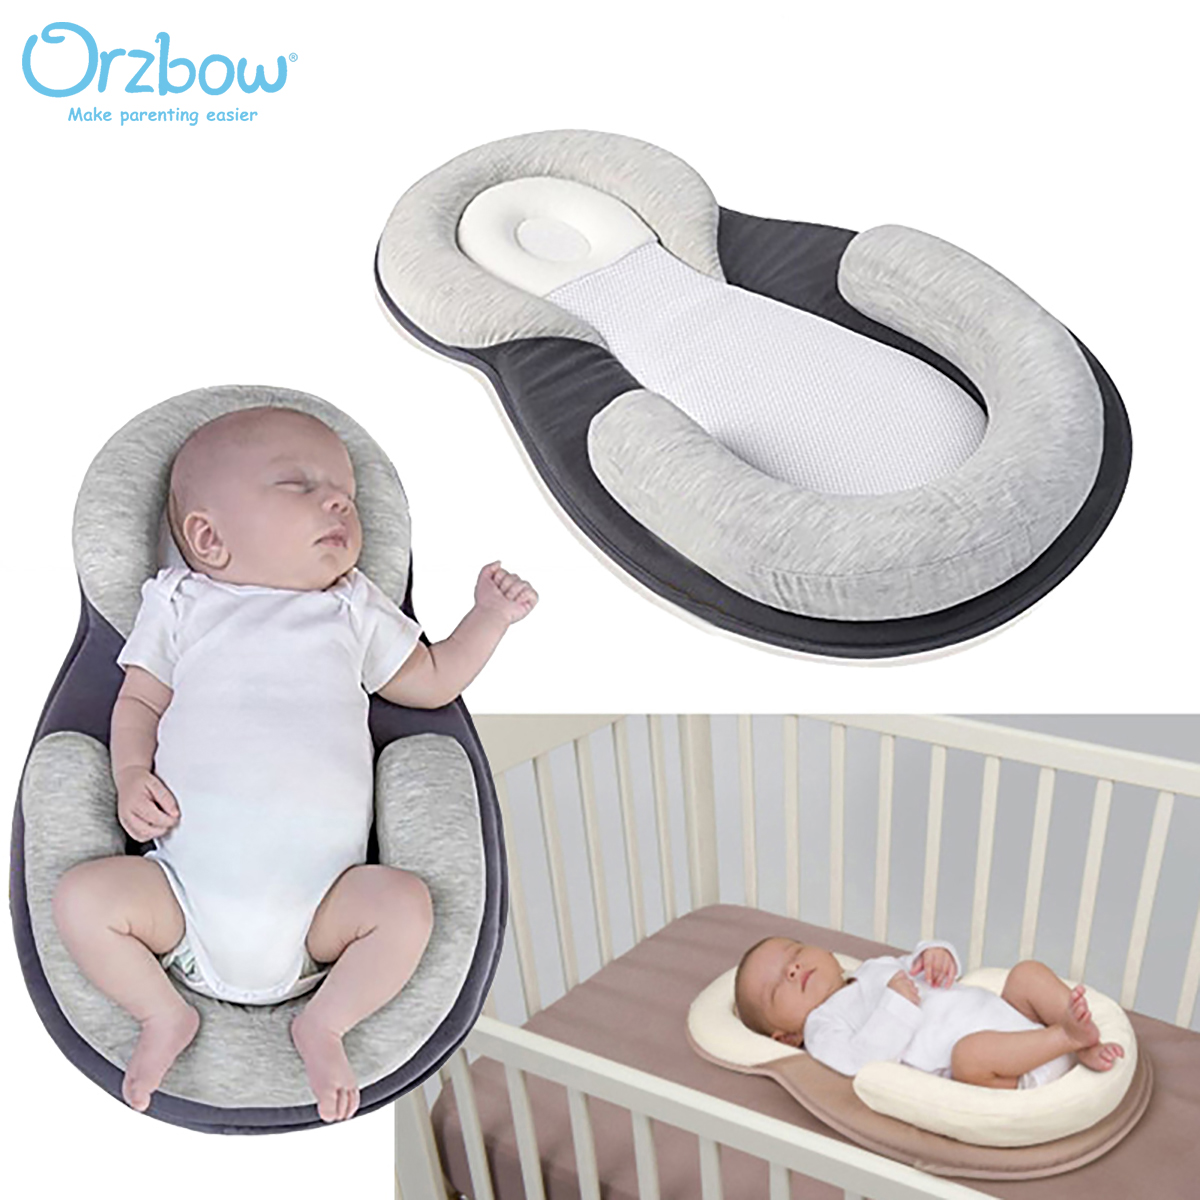 Potable Baby Lounger with Pillow Gray Perfect for Traveling and Napping Baby Nest for Co Sleeping Portable Newborn Lounger Partner for Crib & Bassinet 